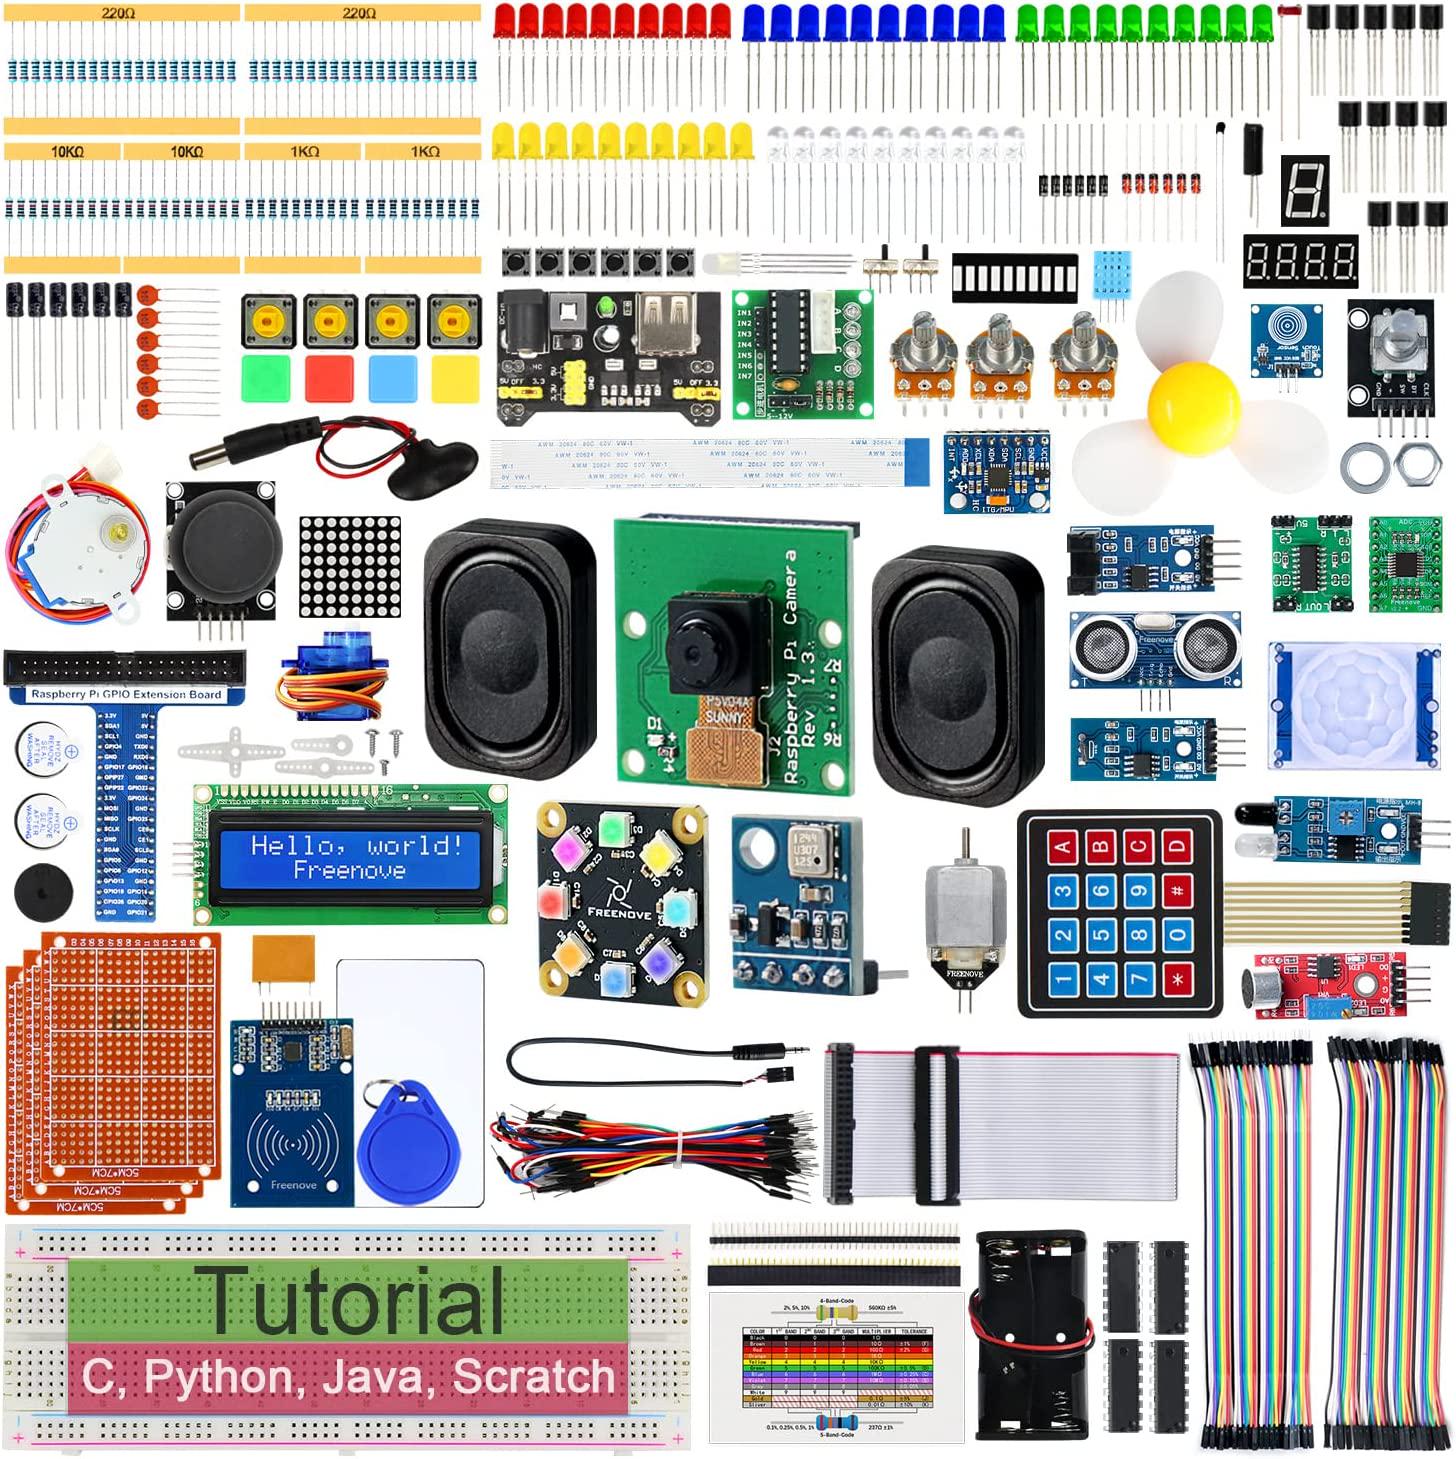 Freenove, Freenove Complete Starter Kit for Raspberry Pi 4 B 3 B+ 400, Python C Java Scratch Code, 708-Page Tutorial, 138 Projects, 386 Items, Camera Speaker Sound Sensor (Raspberry Pi NOT Included)